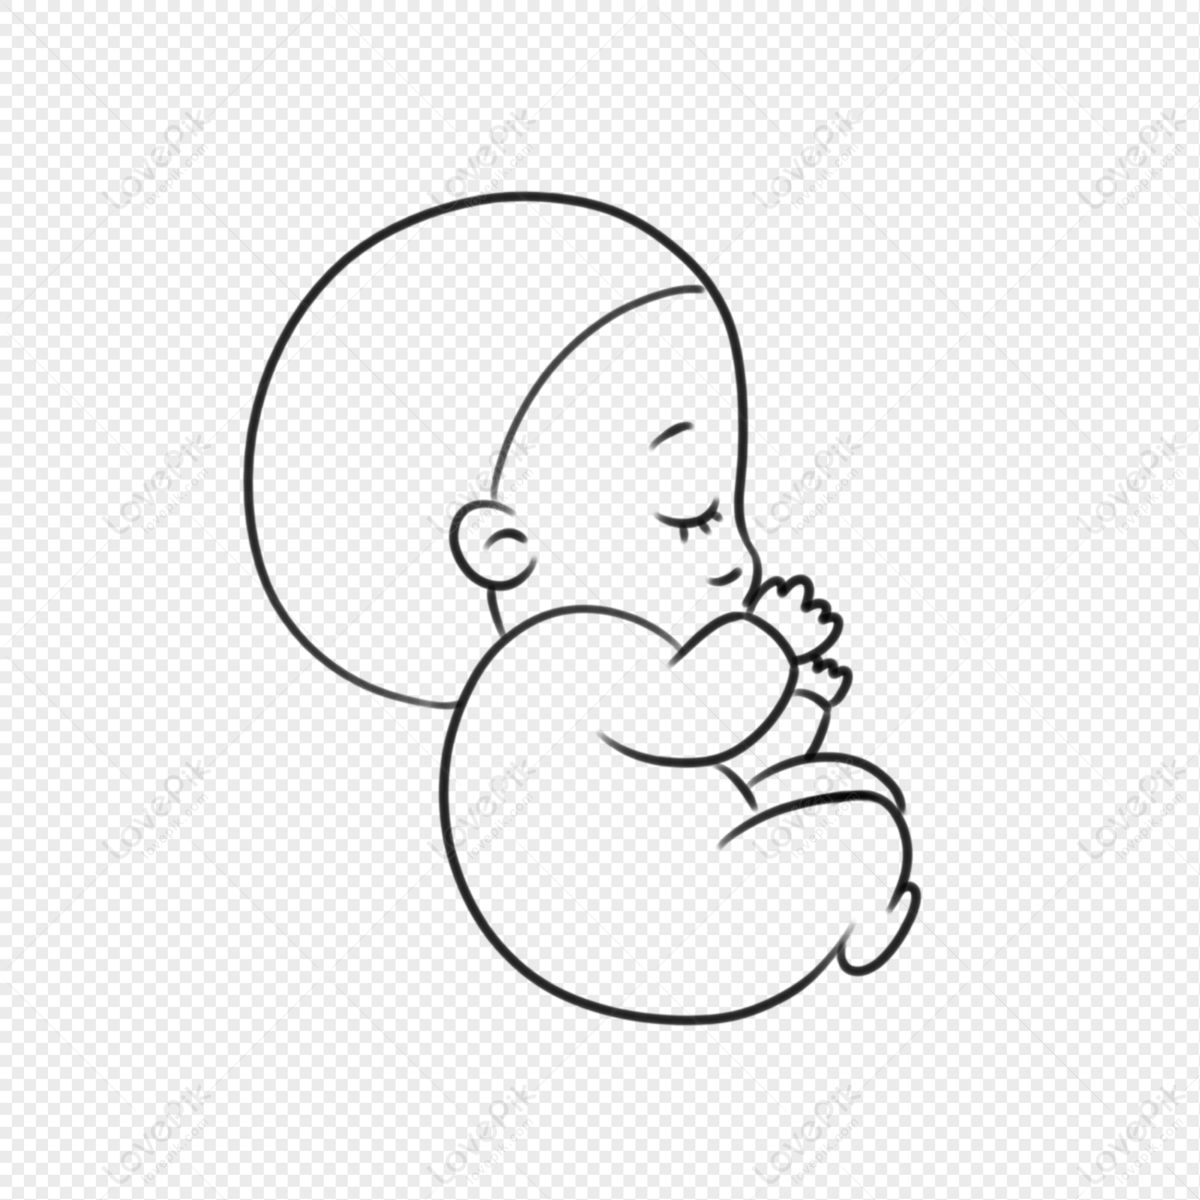 baby sleeping clipart black and white